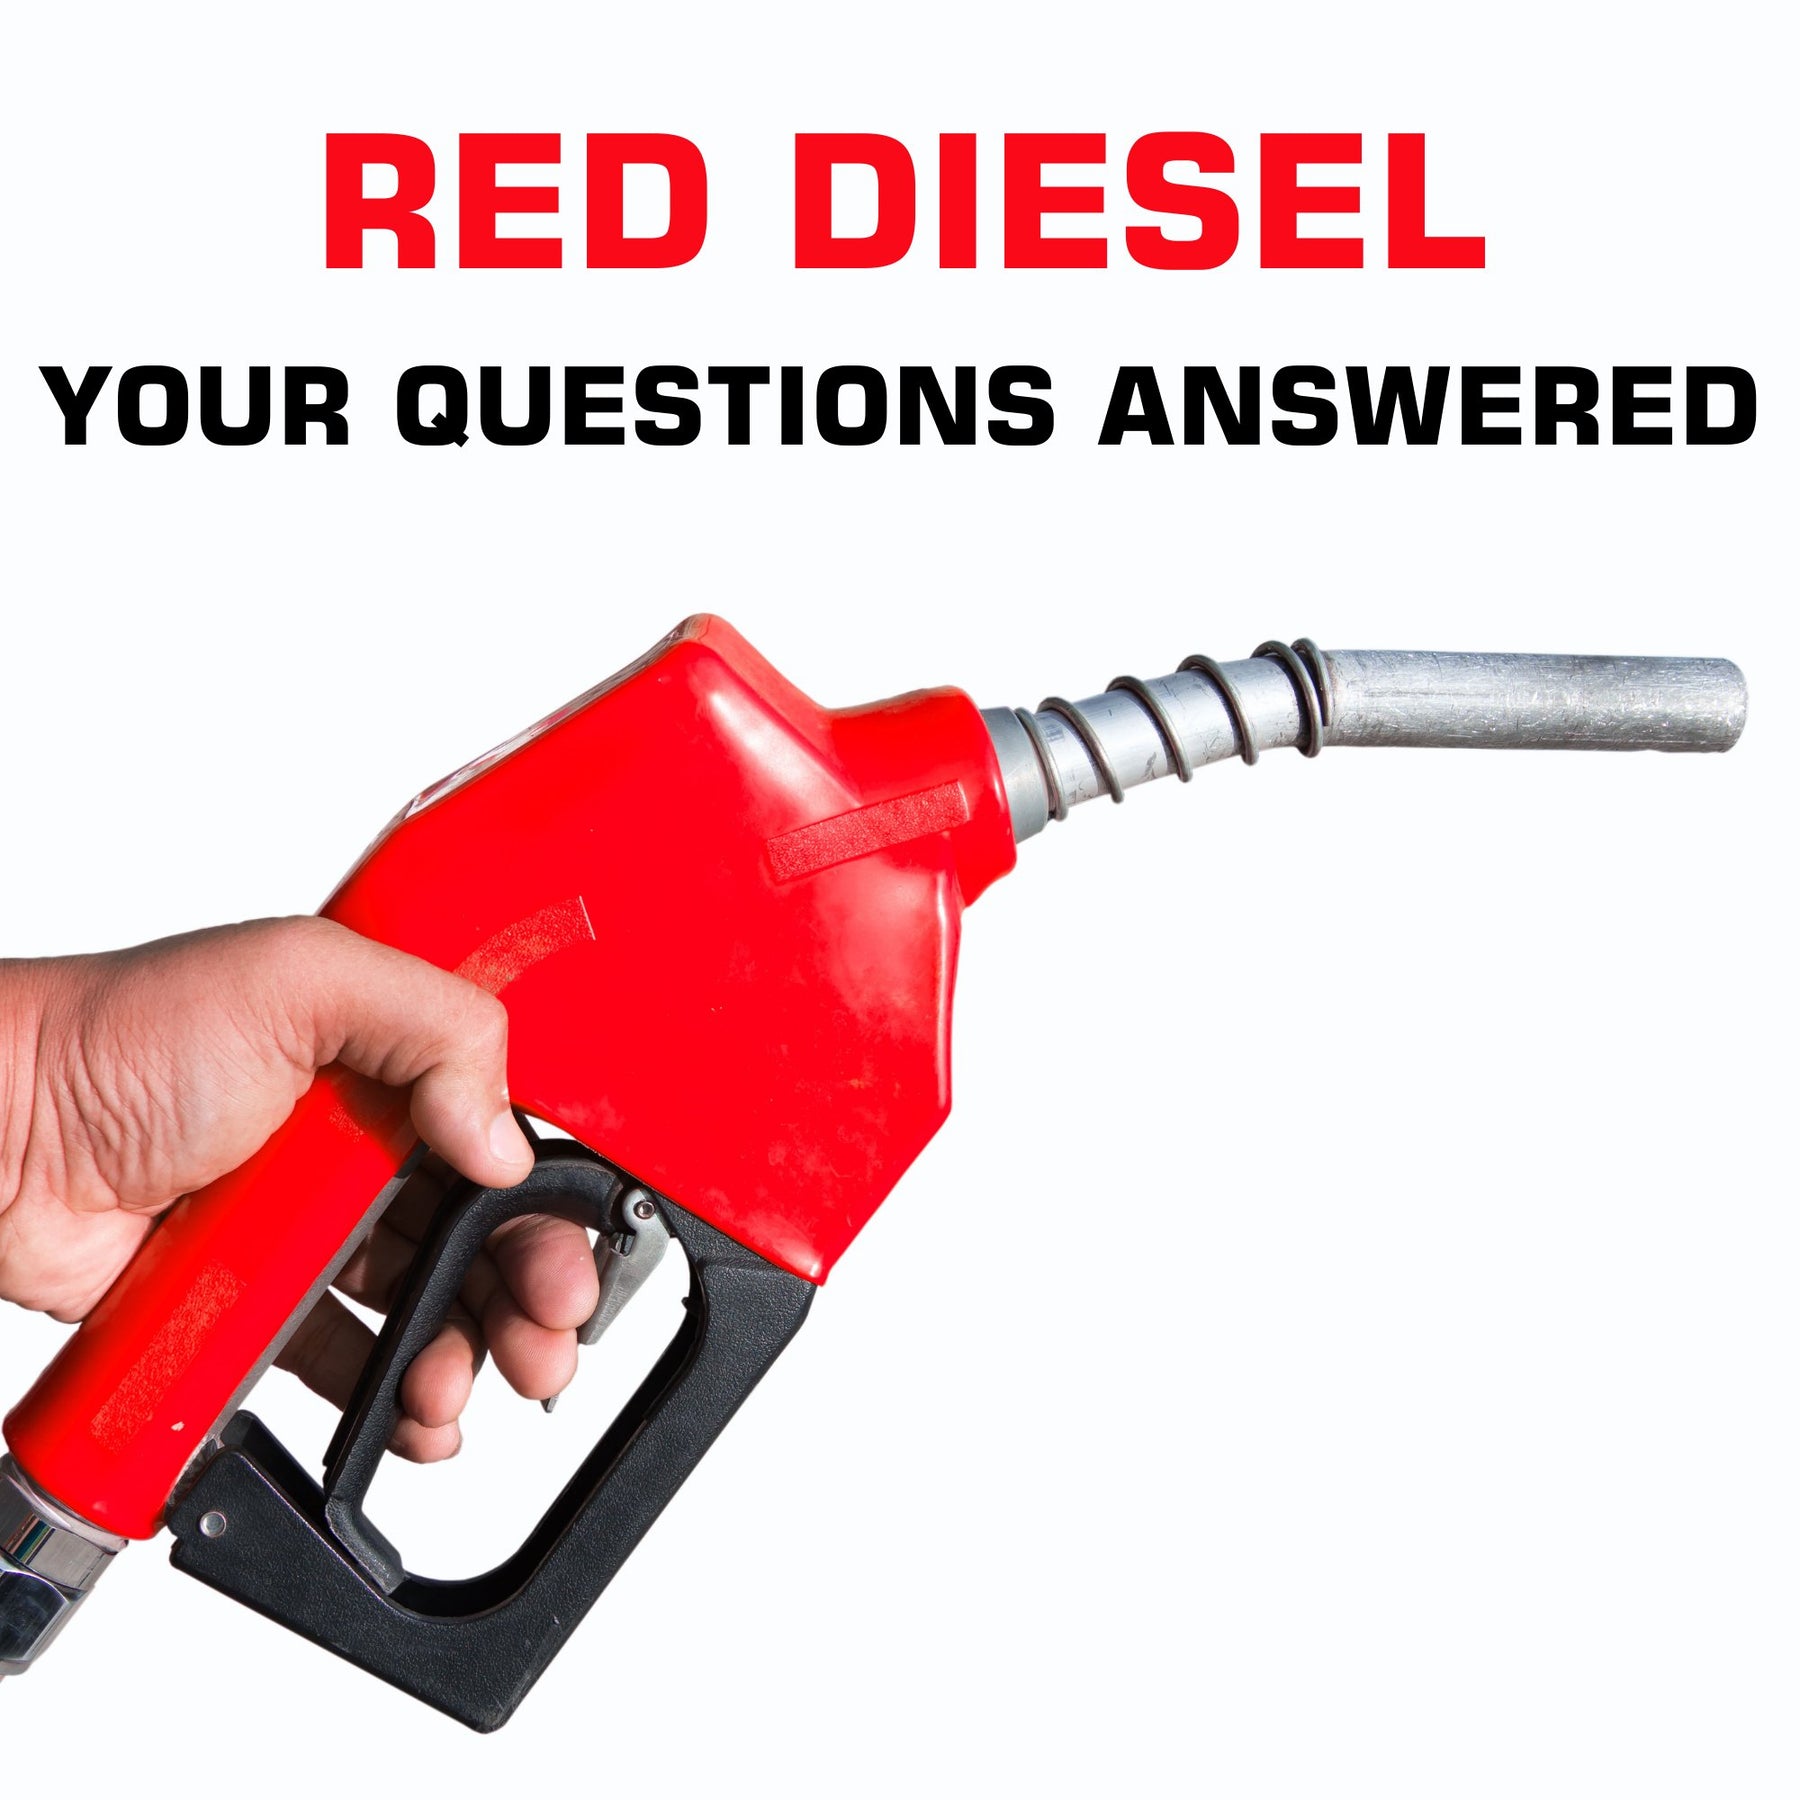 Red diesel - your questions answered!